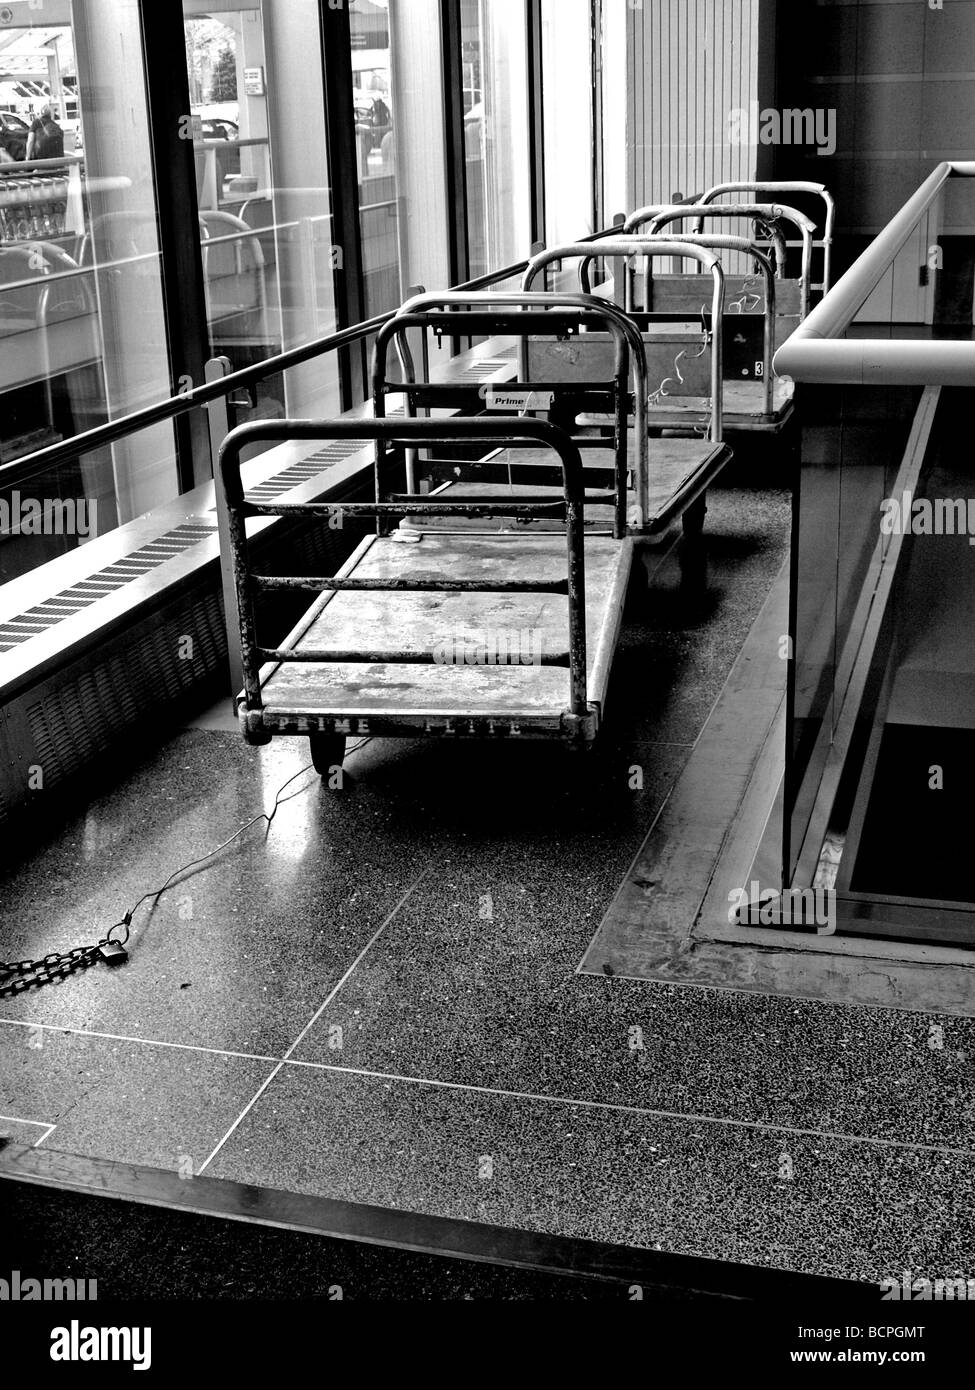 black and white luggage baggage carts used in airport terminal, next to outside windows Stock Photo